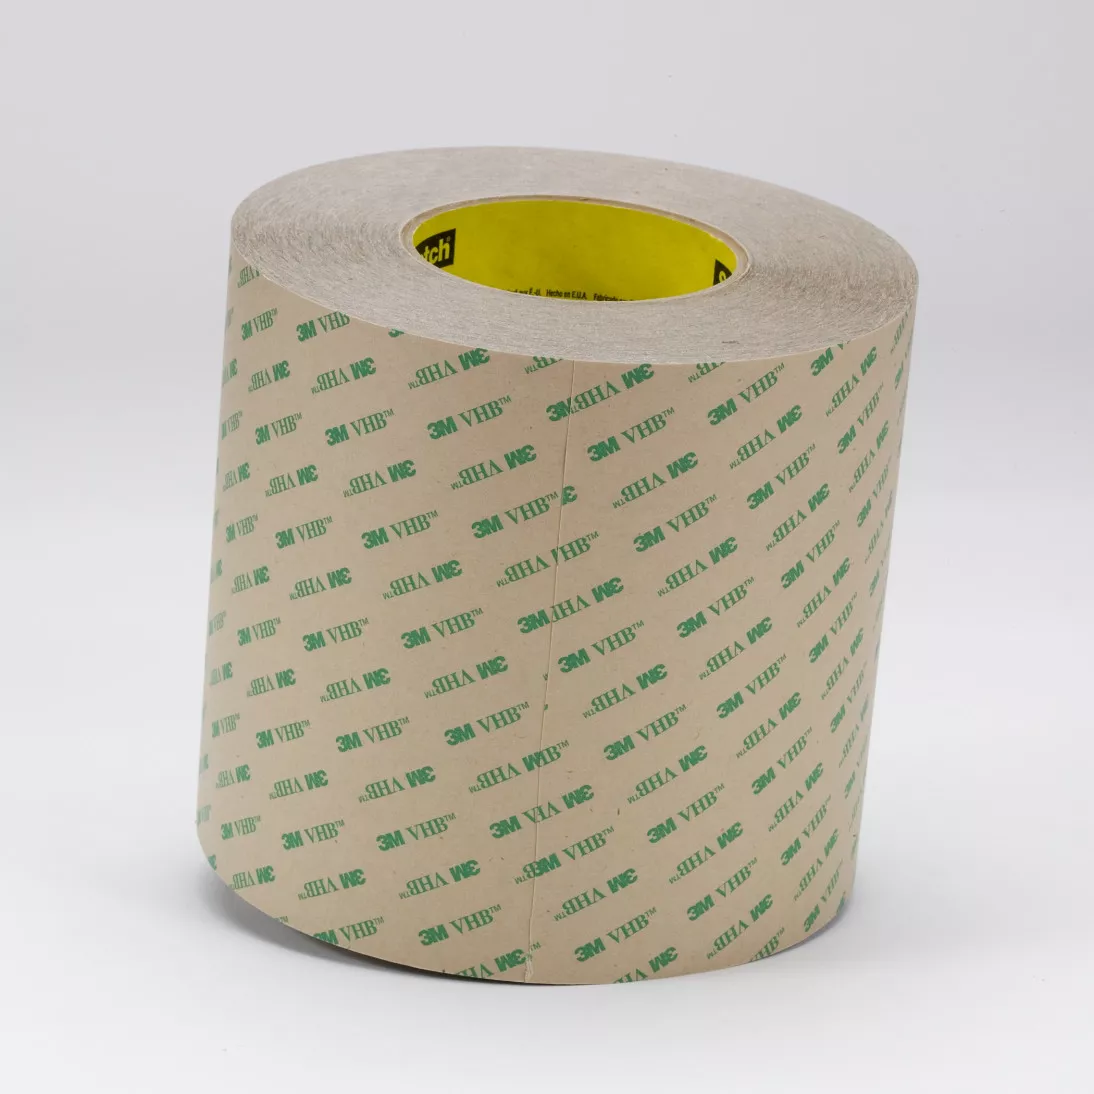 3M™ VHB™ Adhesive Transfer Tape F9460PC, Clear, 14 1/2 in x 360 yd, 2
mil, 1 roll per case, Restricted